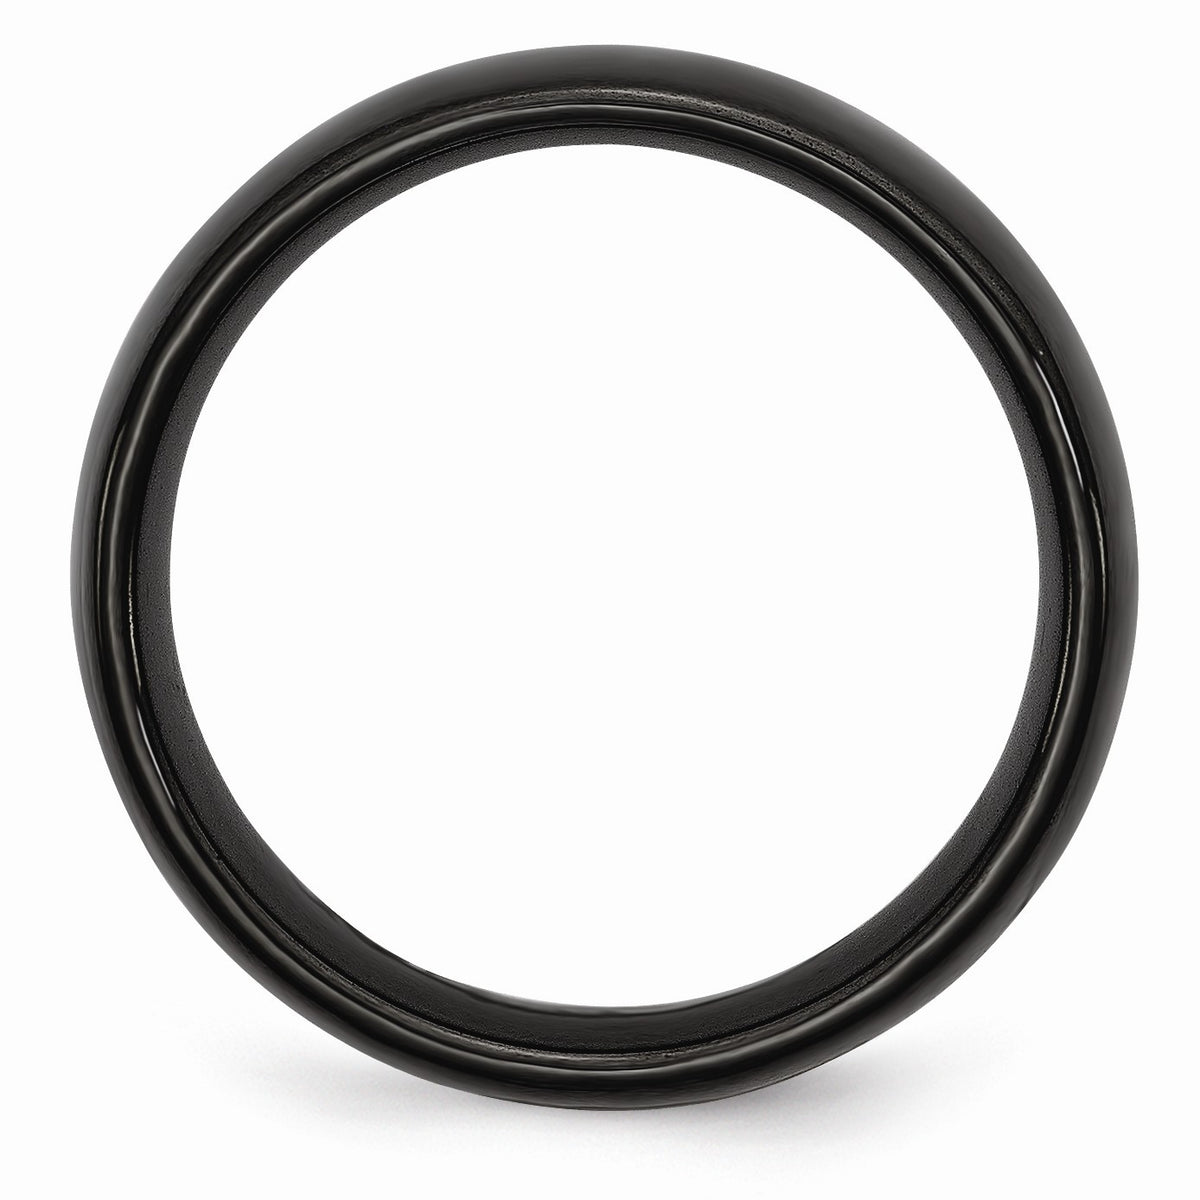 Alternate view of the Black Ceramic, 6mm Polished Domed Comfort Fit Band by The Black Bow Jewelry Co.